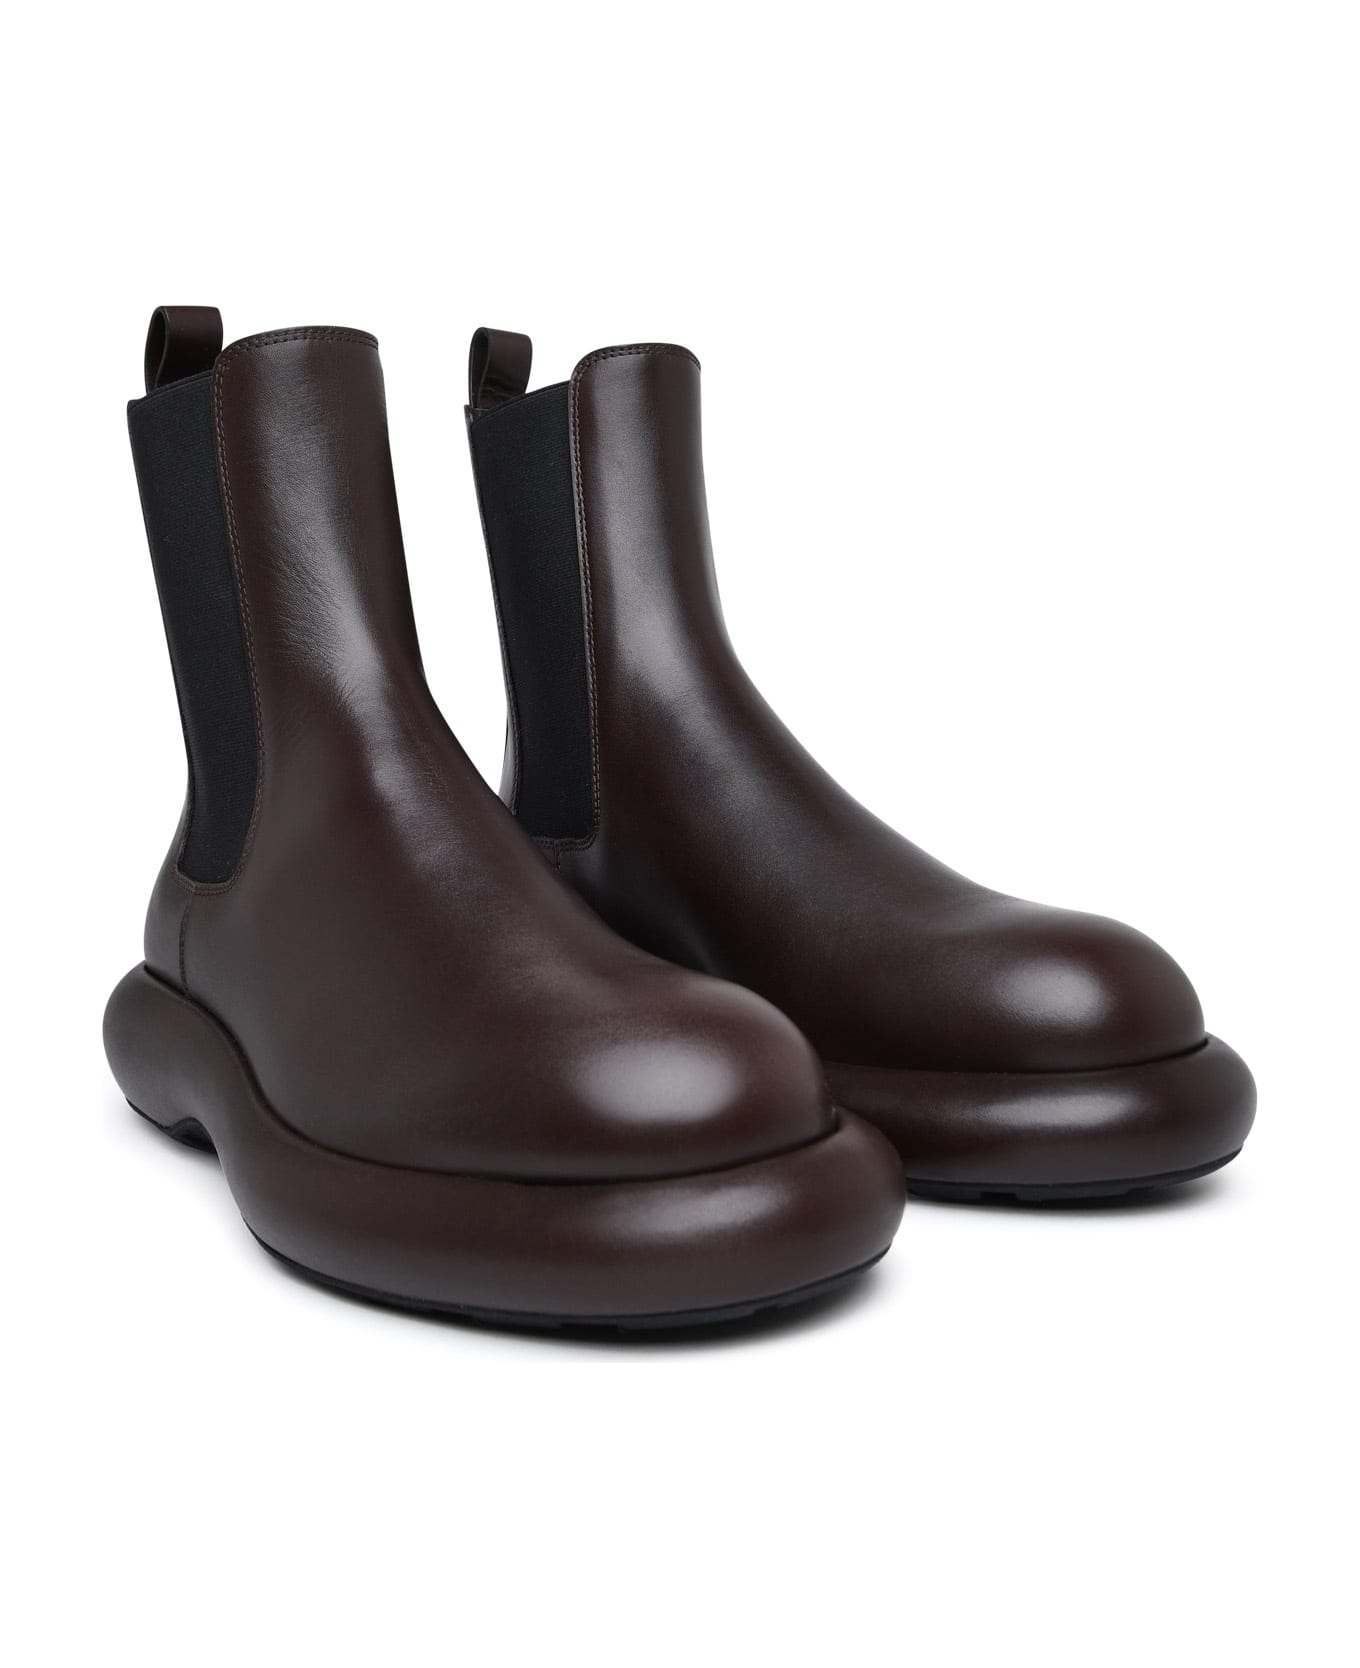 Jil Sander Brown Leather Ankle Boots - Brown